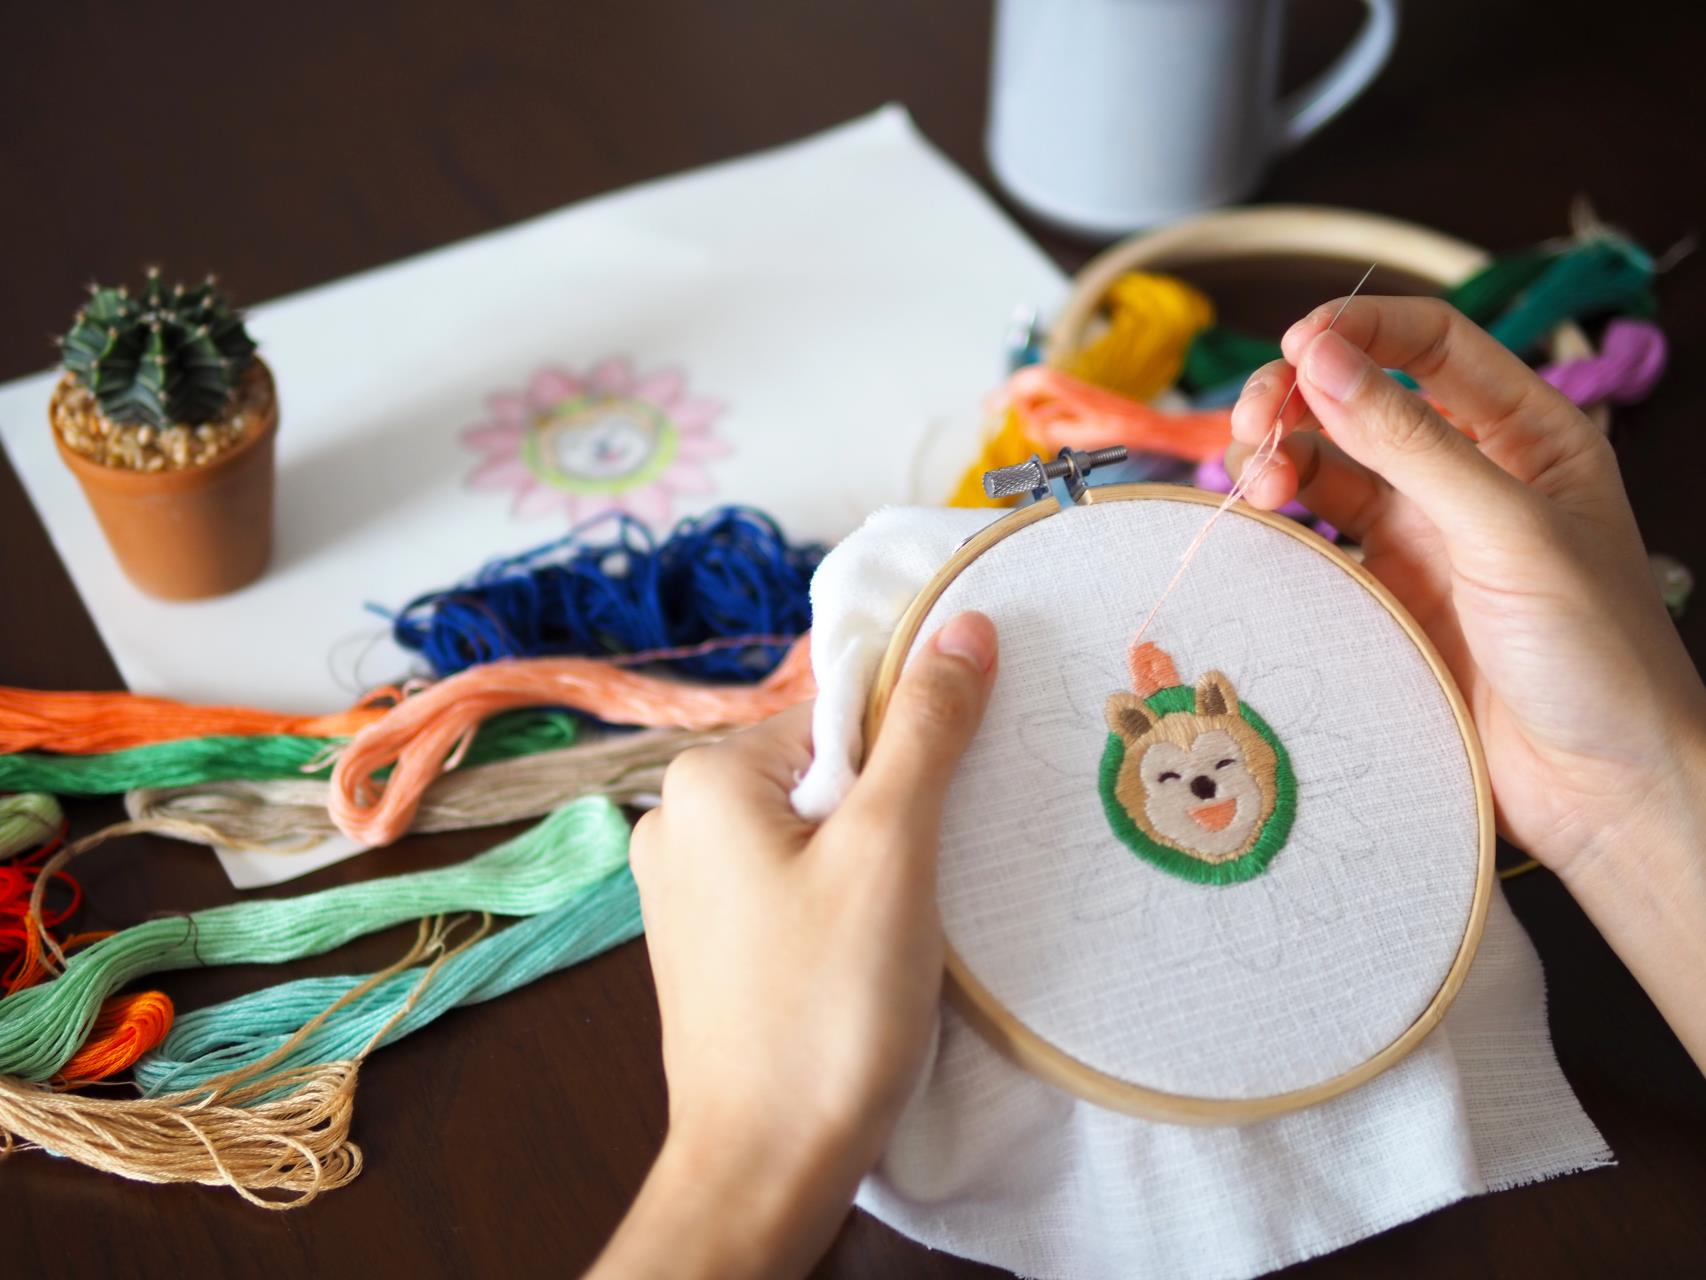 Slow down and Stitch - Embroidery Workshop